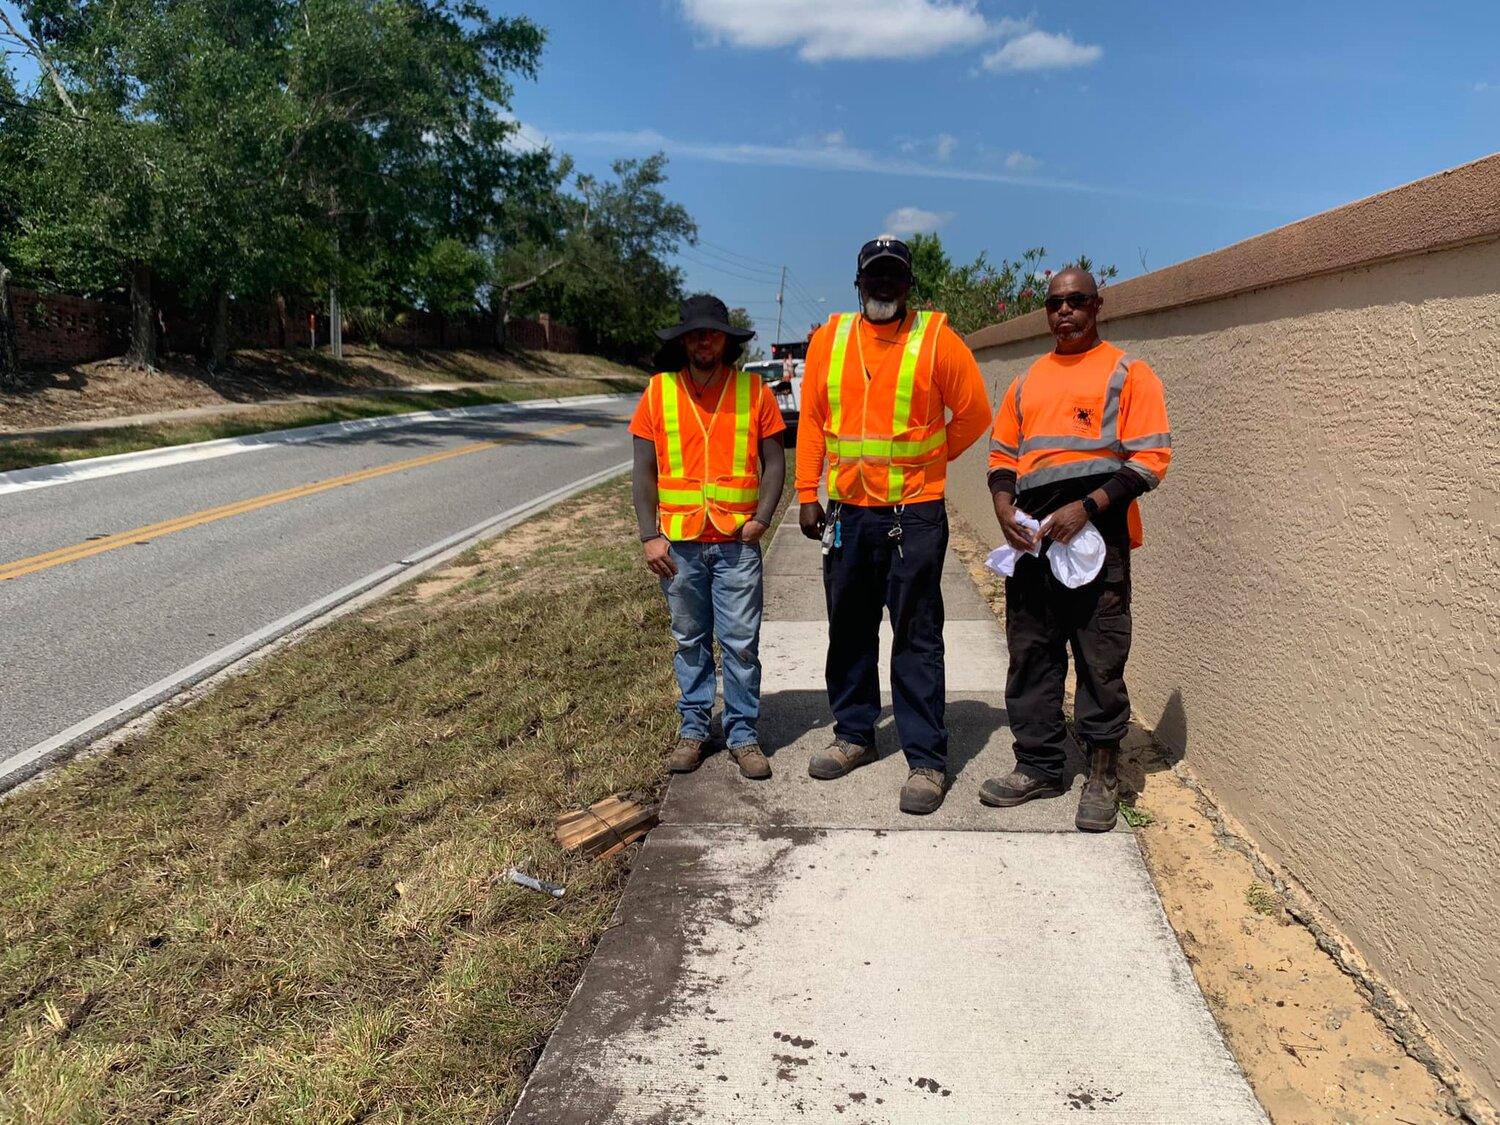 Another call to Orange County Public Works. The team came out, dumped dirt, and laid five pallets of sod in just one location. I’m crossing my fingers they can finish another section or two. Sand on sidewalks is dangerous to pedestrians and cyclists.